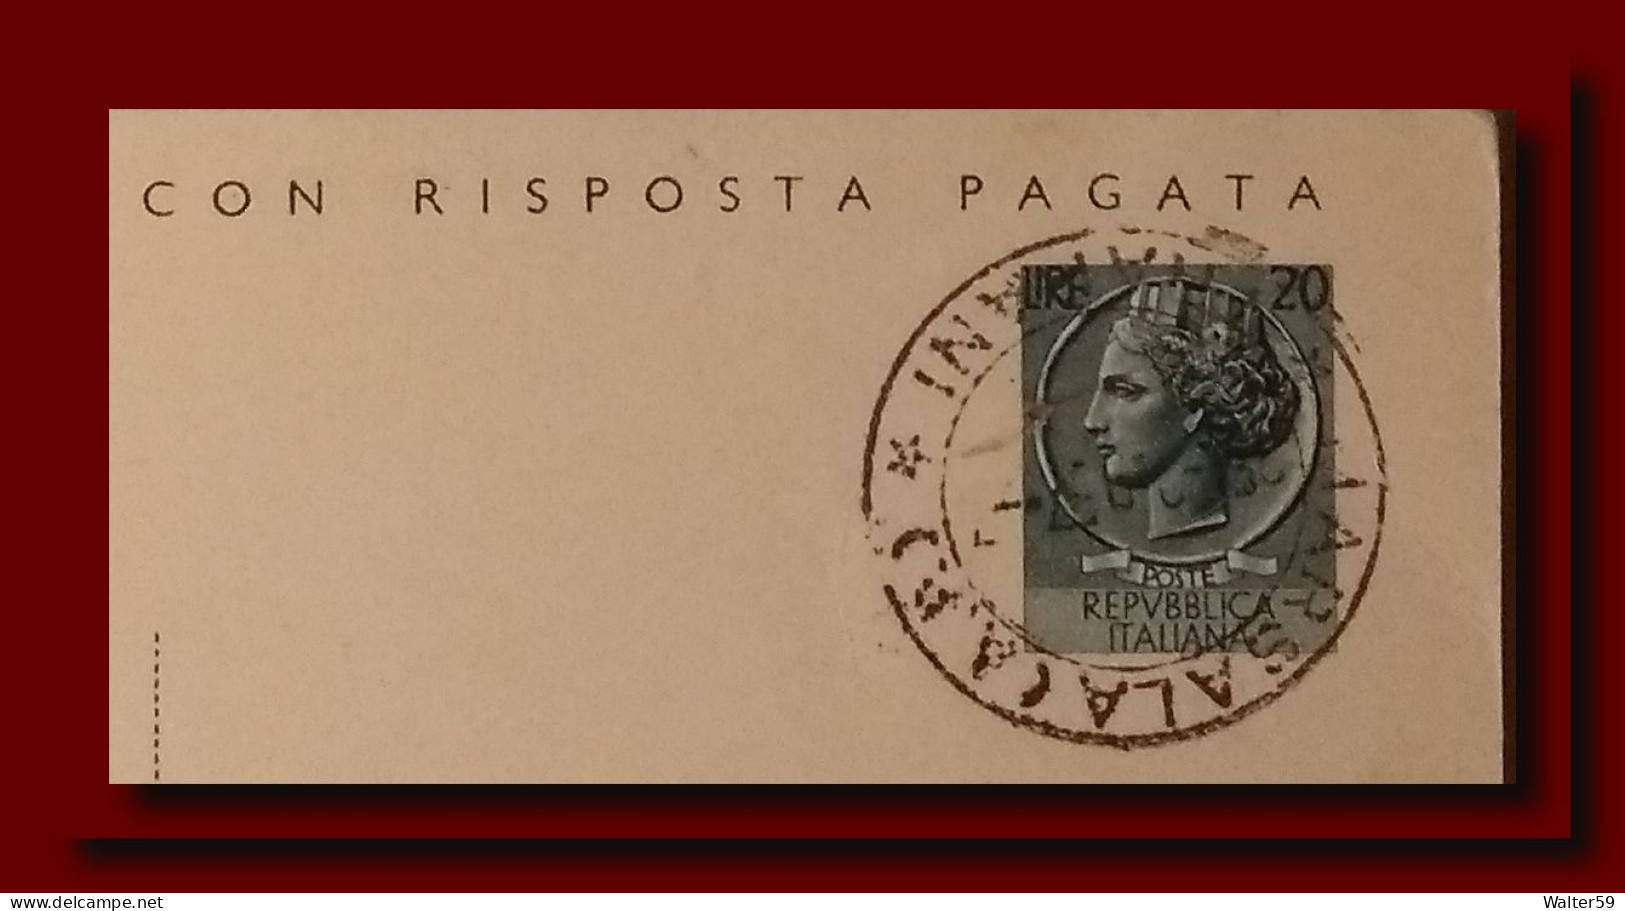 1957 ITALIA ITALY Intero CPRP Sir £20 Parte Domanda Vg MARSALA X ROMA Ps Card 2scans - Stamped Stationery